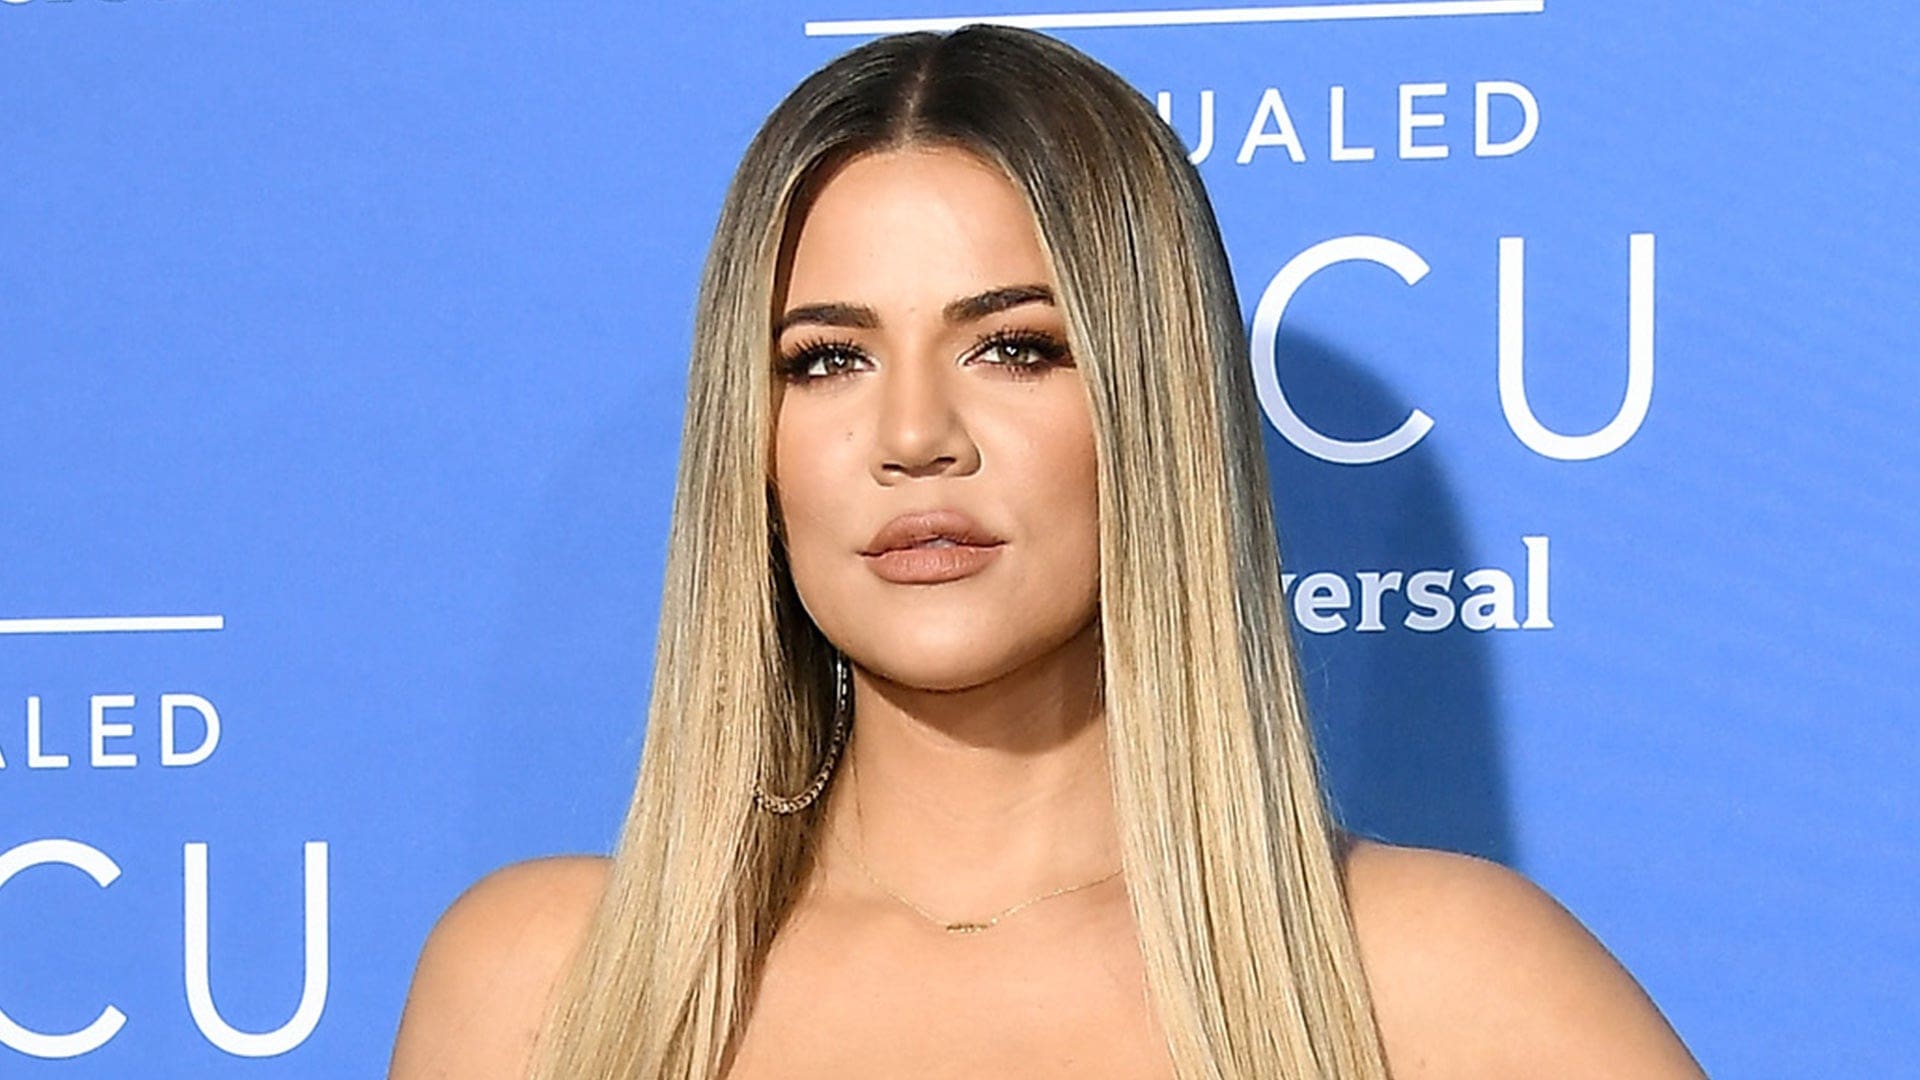 ”khloe-kardashian-reveals-she-had-a-nose-job-see-what-she-said-about-the-whole-thing”